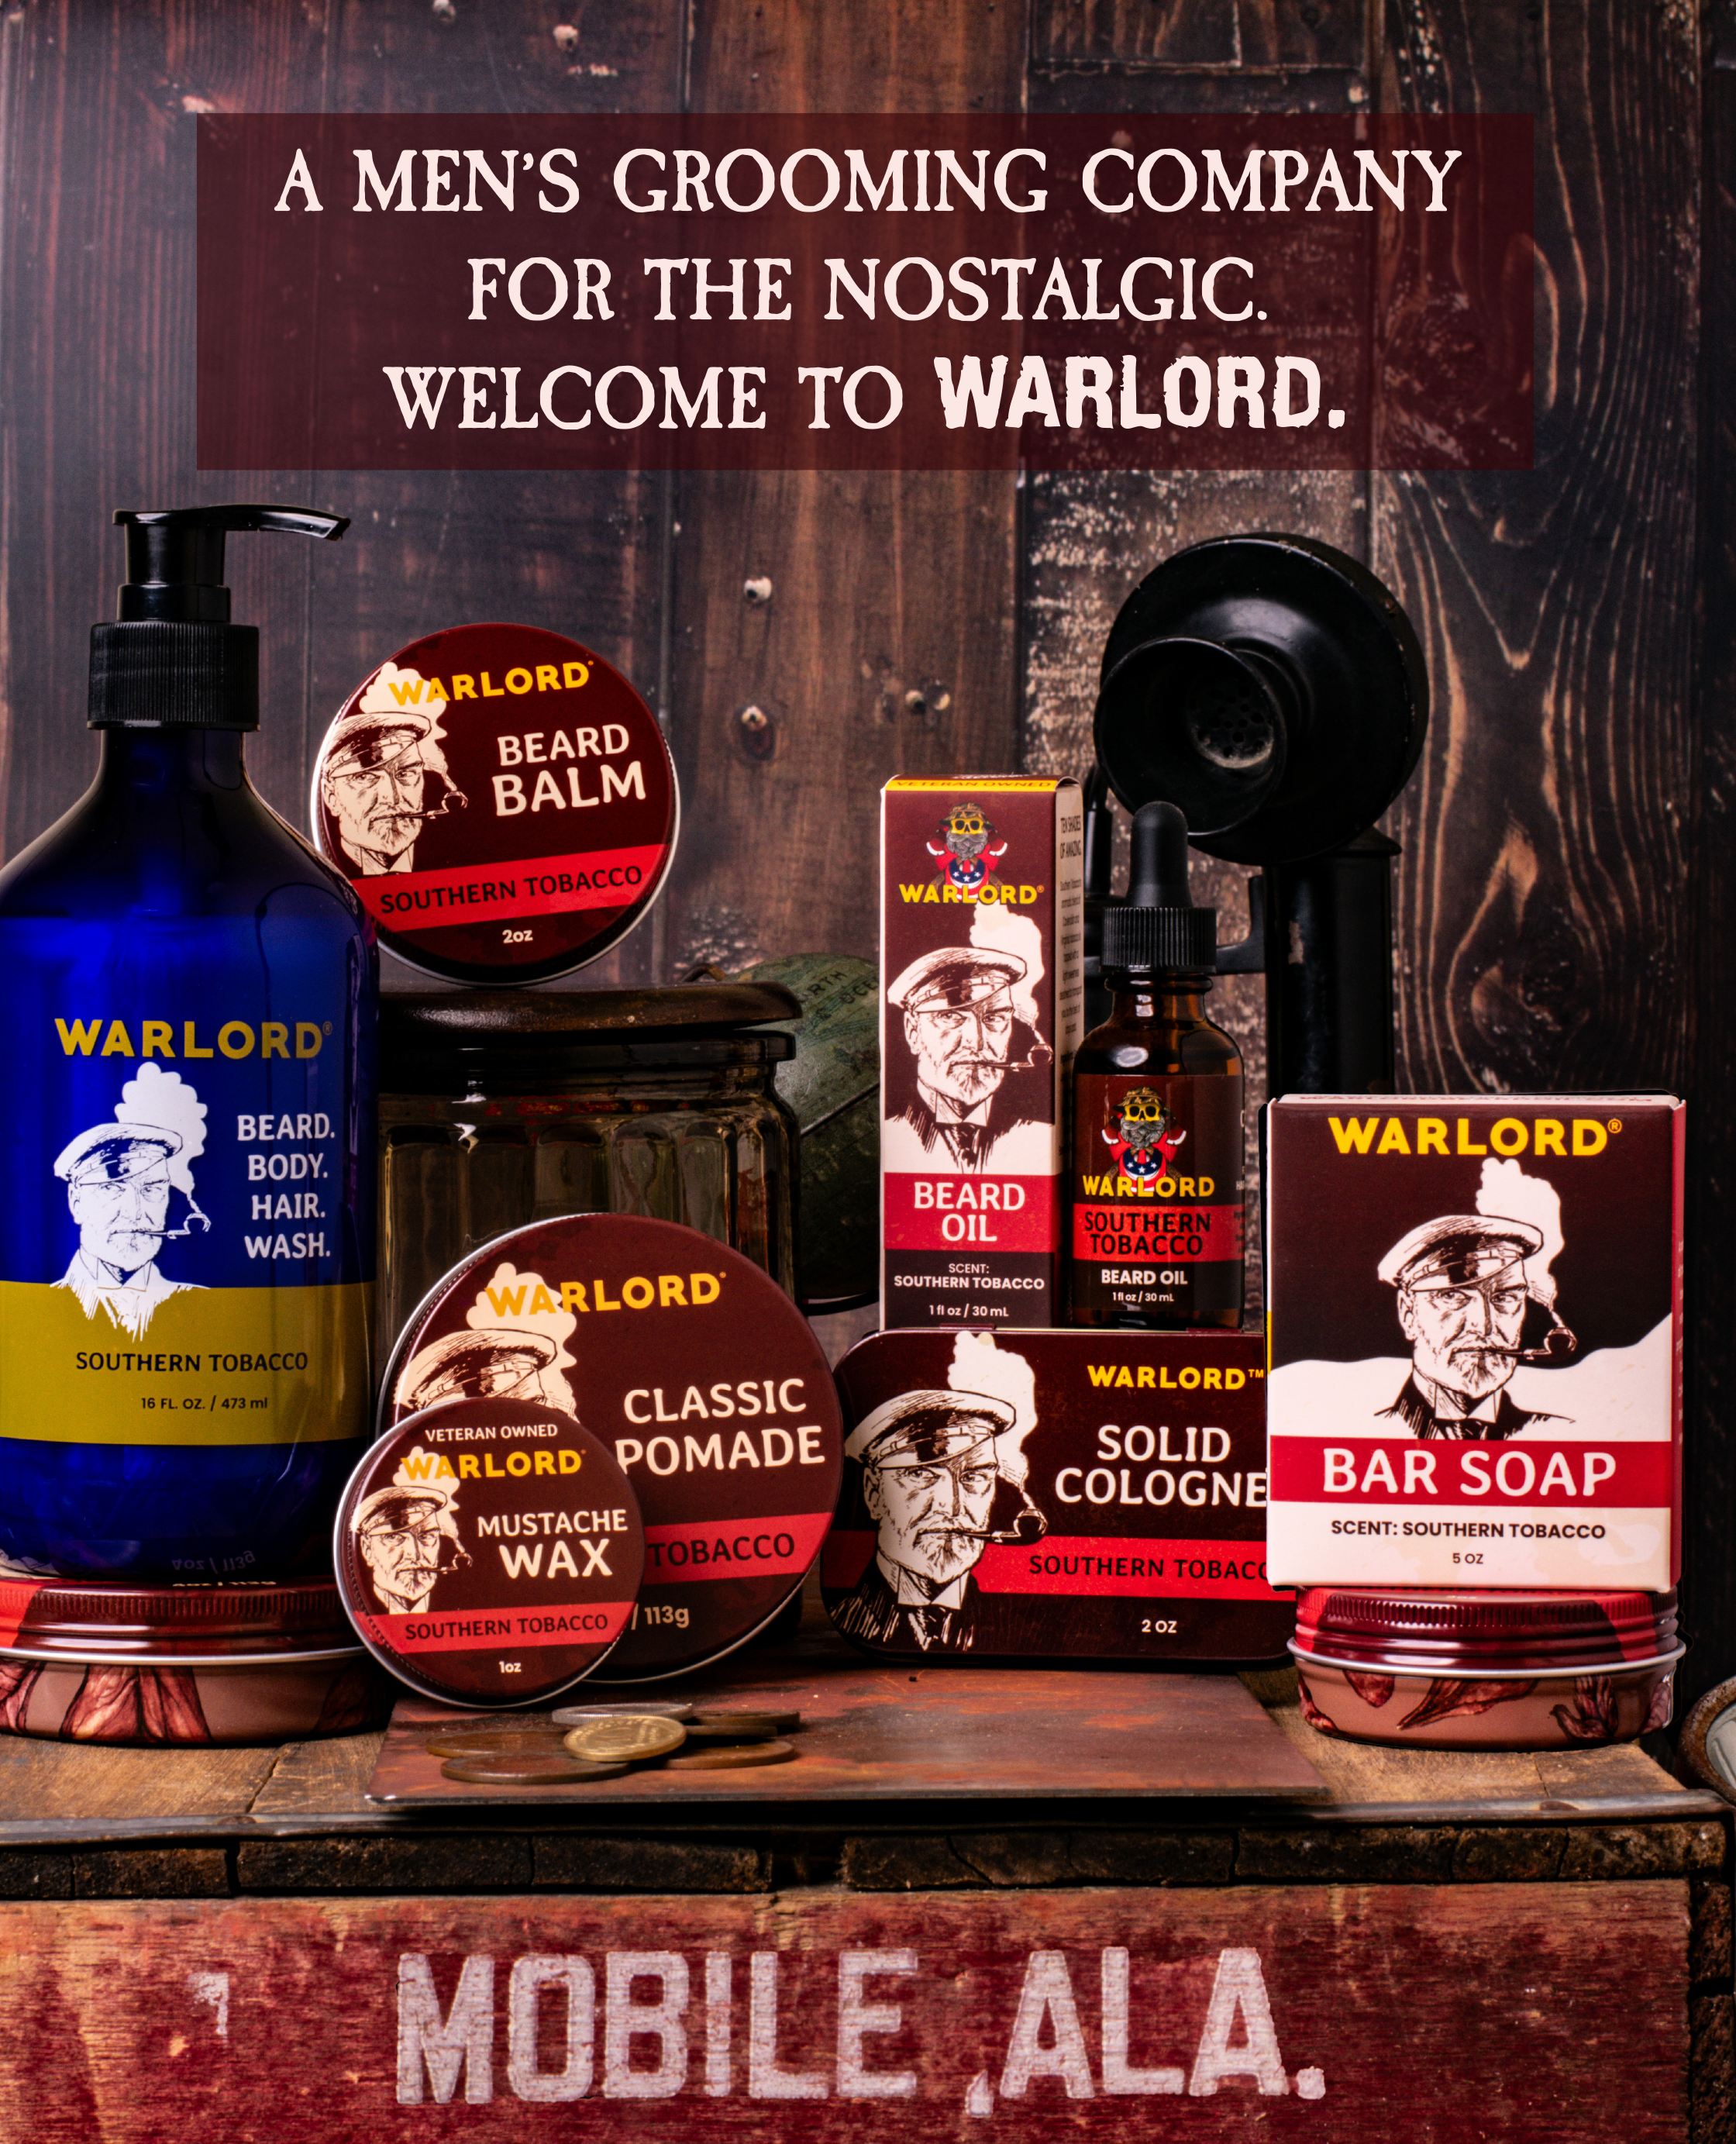 Warlord Men's Grooming Essentials display featuring a range of products such as beard oil, beard balm, bar soap, solid cologne, and beard wash all with a Southern Tobacco scent, showcased on a vintage rustic wooden background with candlestick telephone on top of an old crate that has in Mobile, Alabama. The vintage-style packaging emphasizes the nostalgic approach the company takes. A men's grooming company for the nostalgic. Welcome to Warlord..